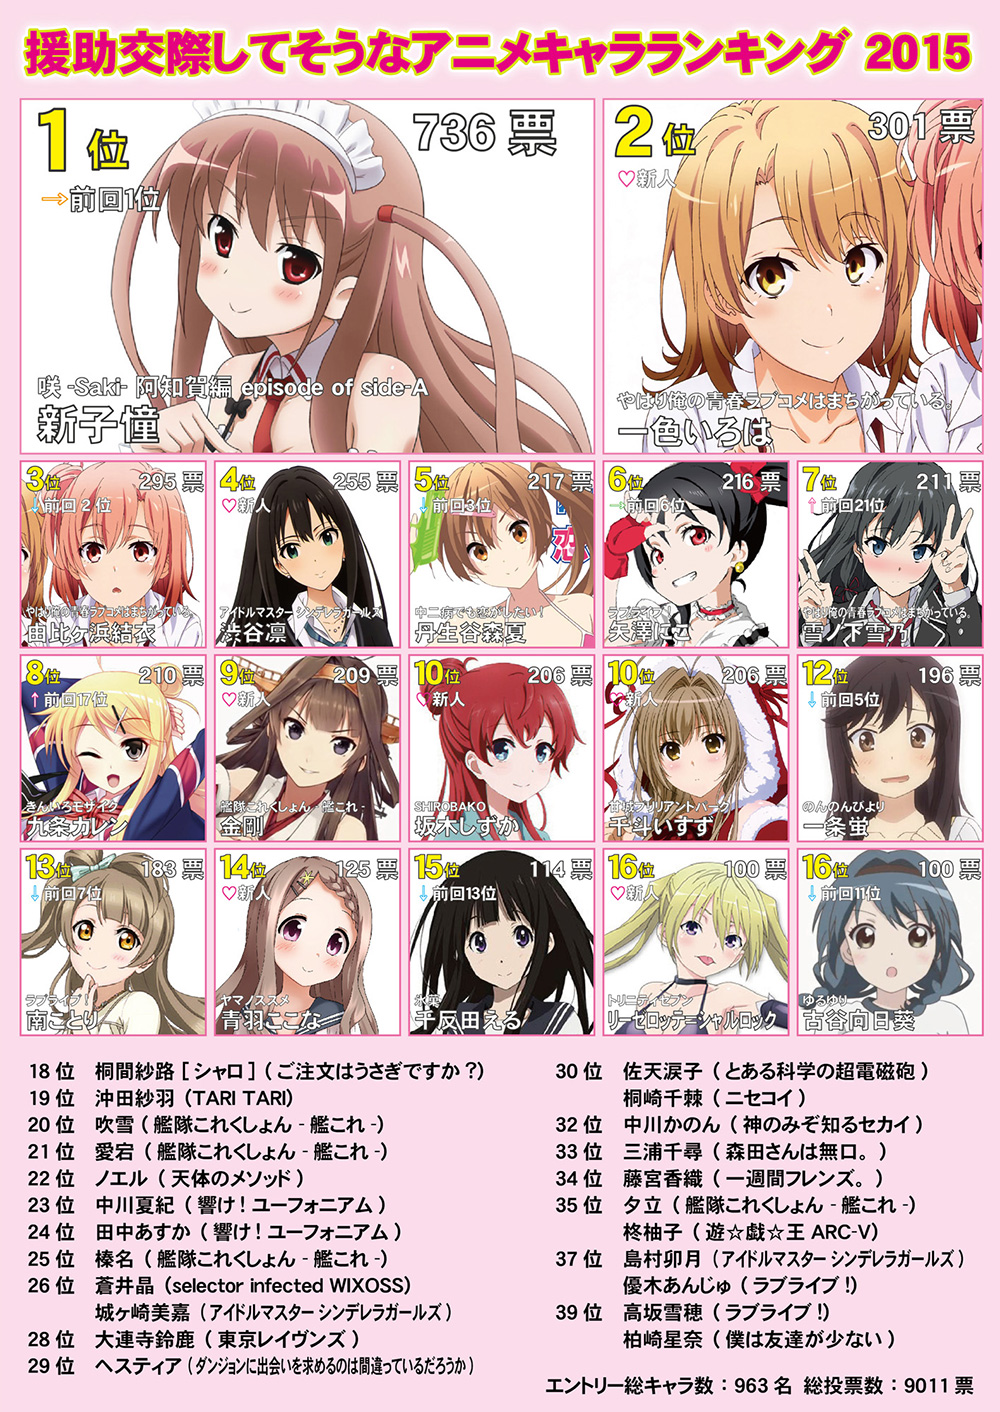 2ch-Top-Anime-Characters-They-Want-to-Date-2015